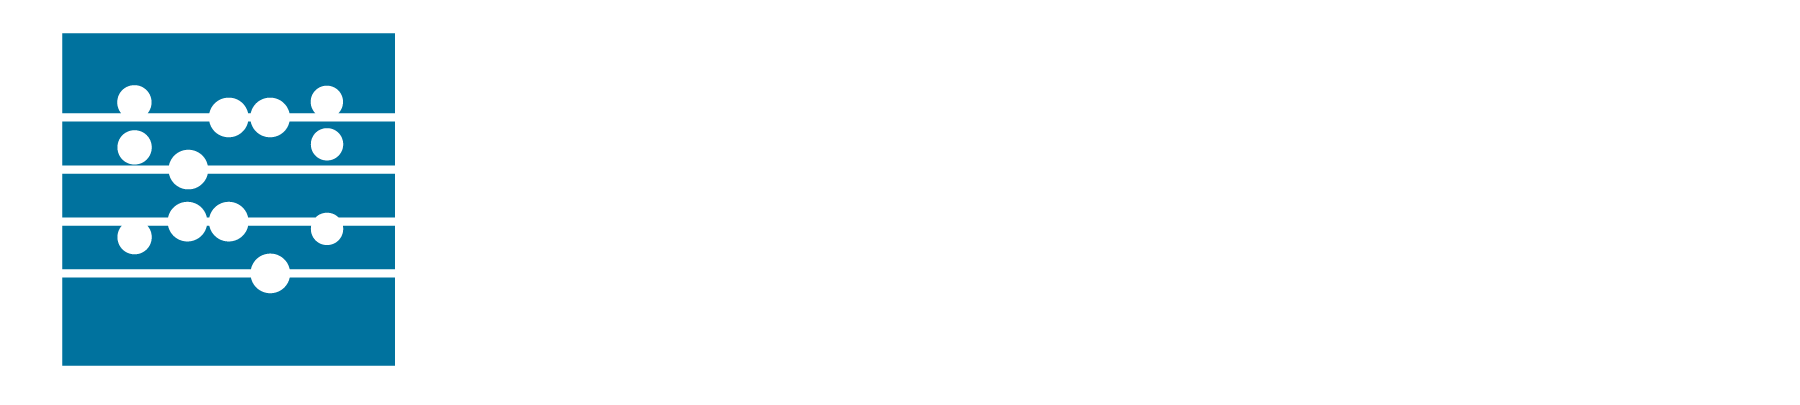 Abacus Property Management Logo - Select To Go Home